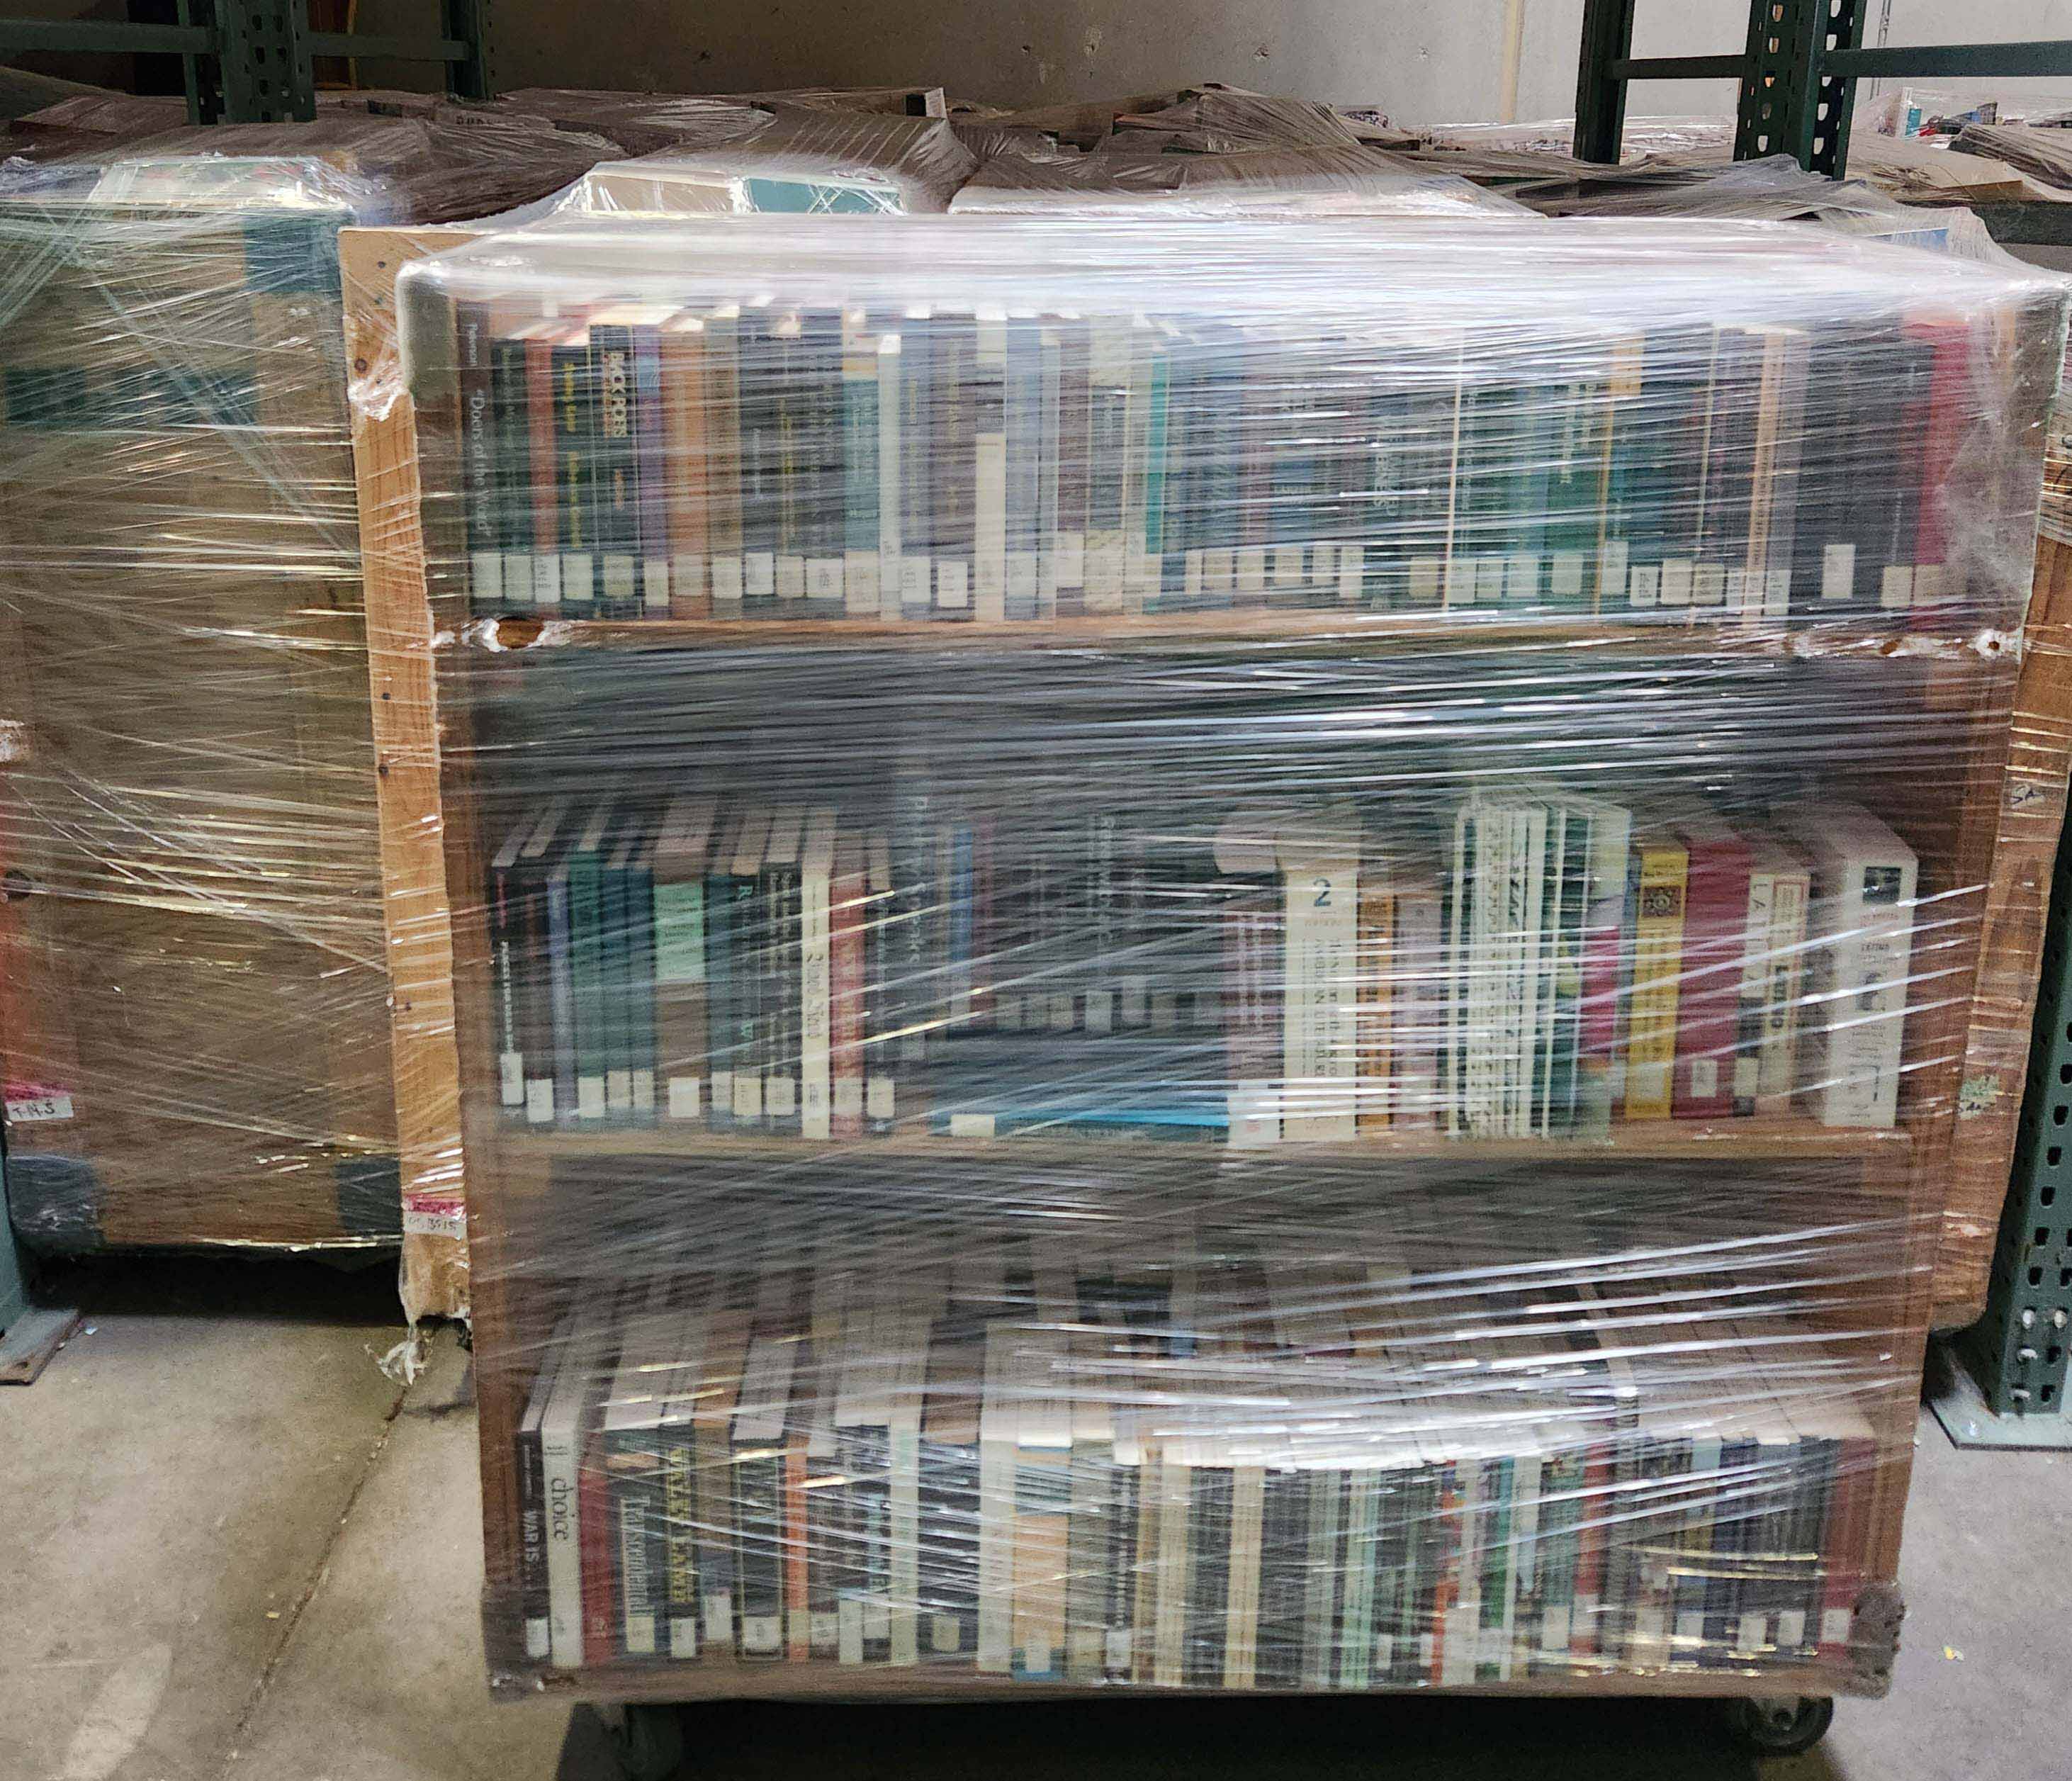 Books wrapped in cellophane being protected for safe moving.